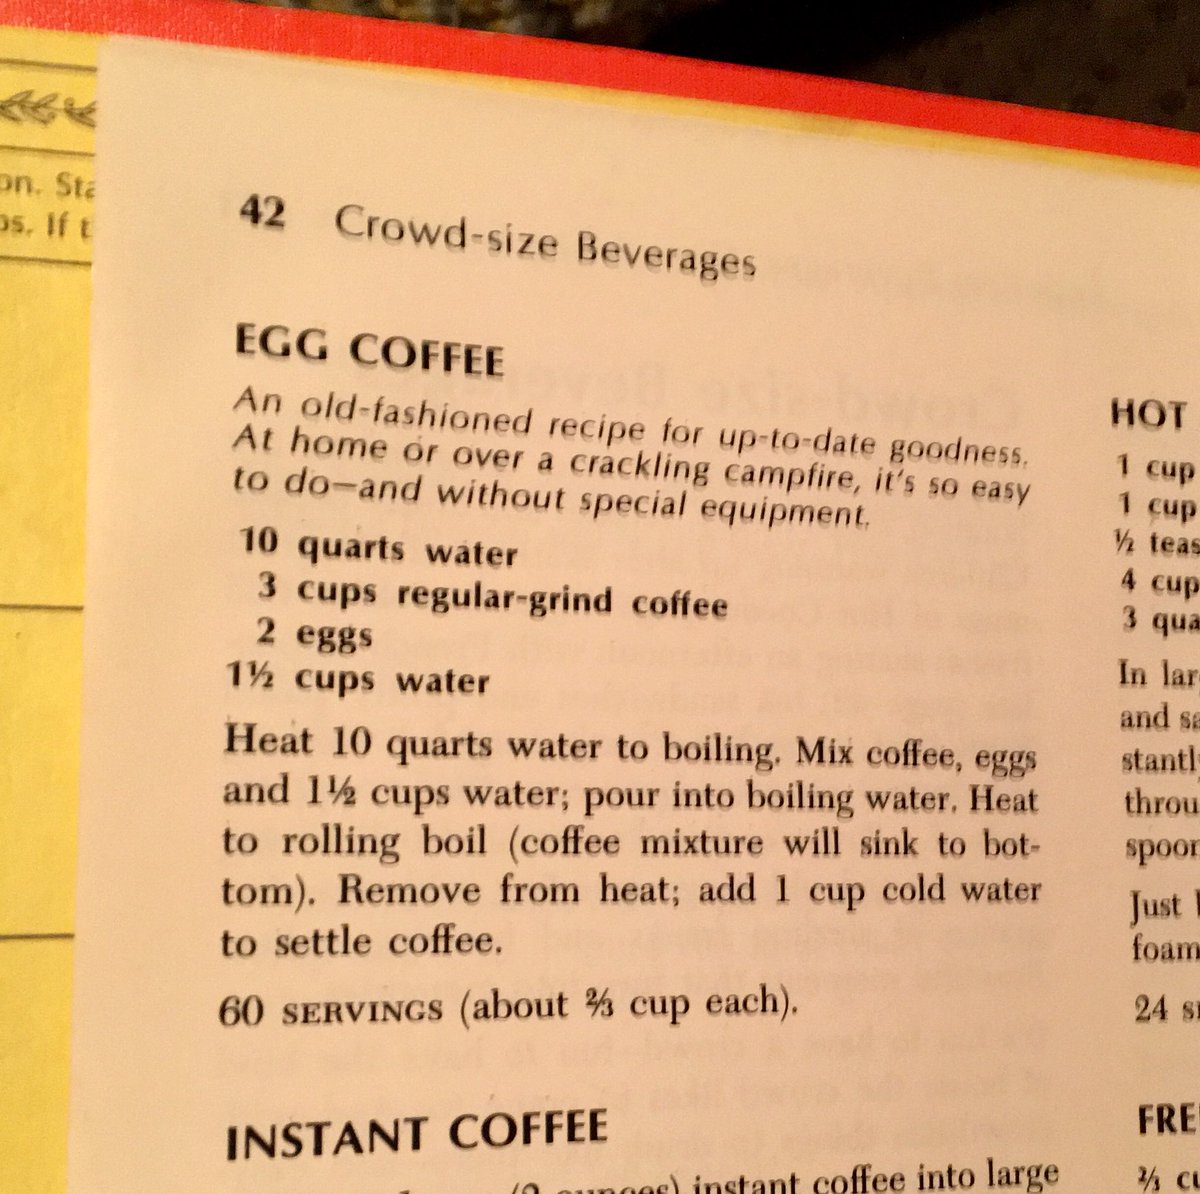 And then: EGG COFFEE“An old-fashioned recipe for up-to-date goodness!”What? What is happening?Wouldn’t this be like egg-drop coffee?How is this enough of a thing to be in the 1969 Betty Crocker cookbook if we coffee sophisticants of the future have never heard of it?! /7